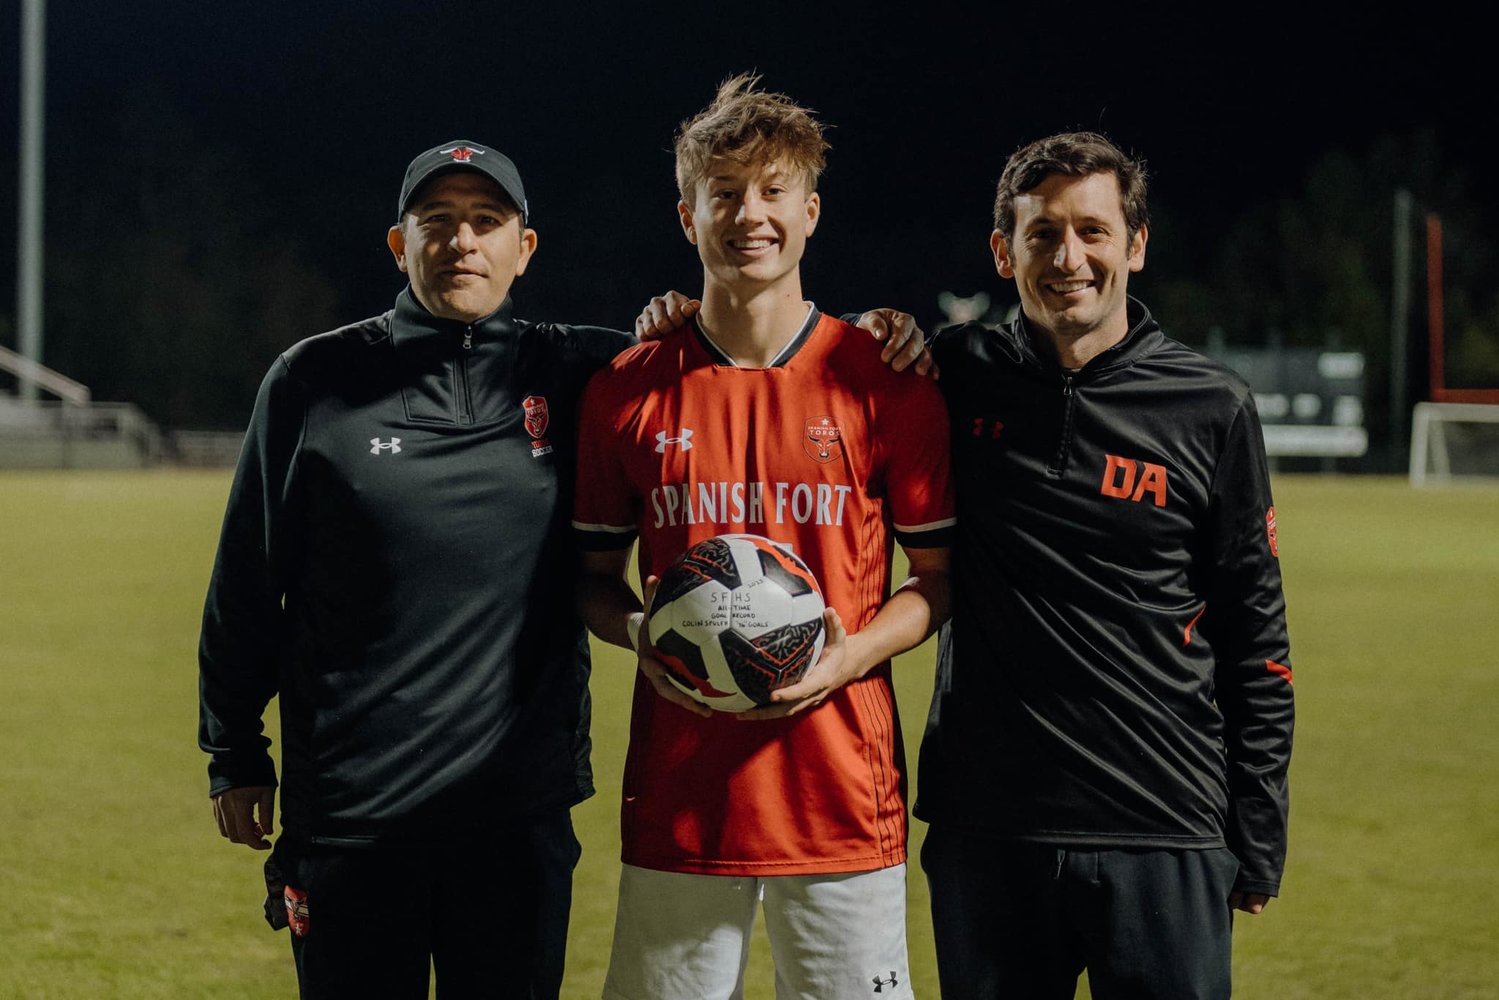 Spanish Fort senior Colin Spuler was awarded the game ball from the Toros’ 10-0 win over the Baldwin County Tigers Tuesday, March 14, after he set the all-time program record with 76 career goals. The four-year starter and AHSAA All-Star contributed seven goals to Spanish Fort’s first three wins within Class 6A Area 2 where opponents were outscored 22-0.